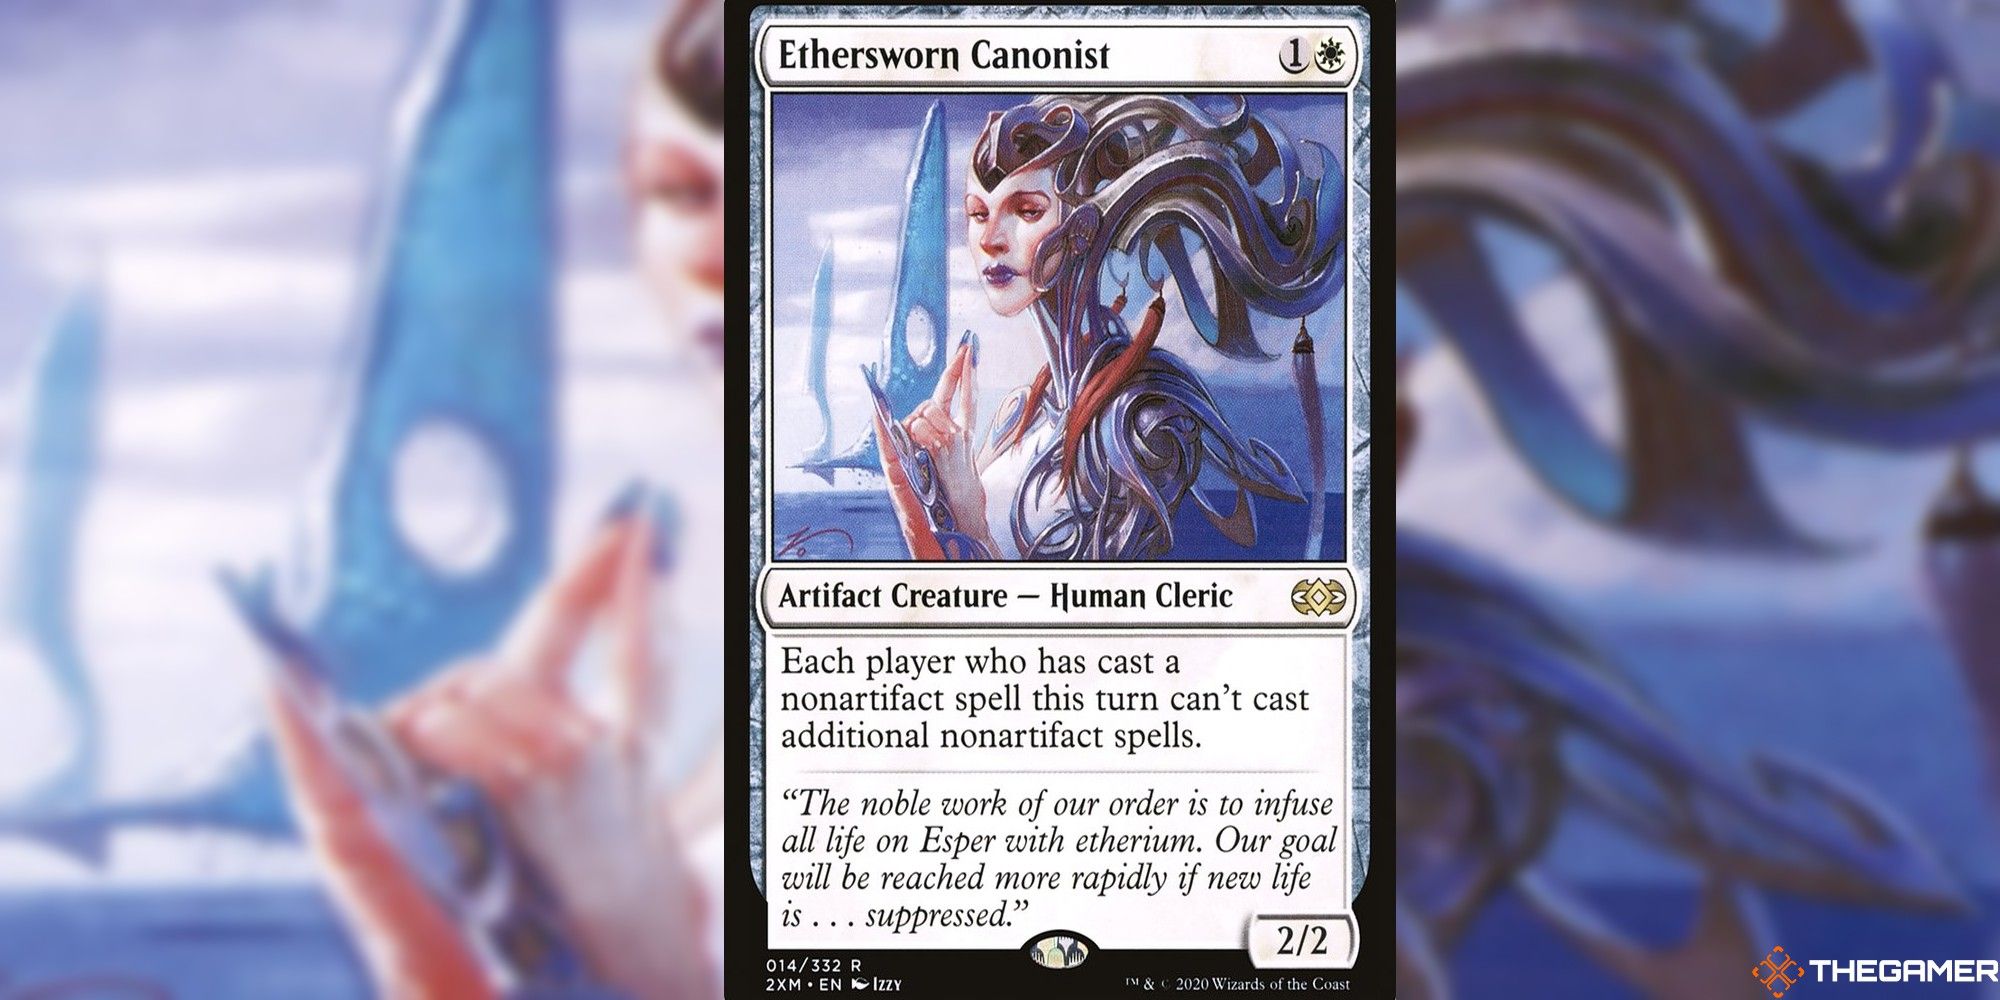 ethersworn canonist full card and art background